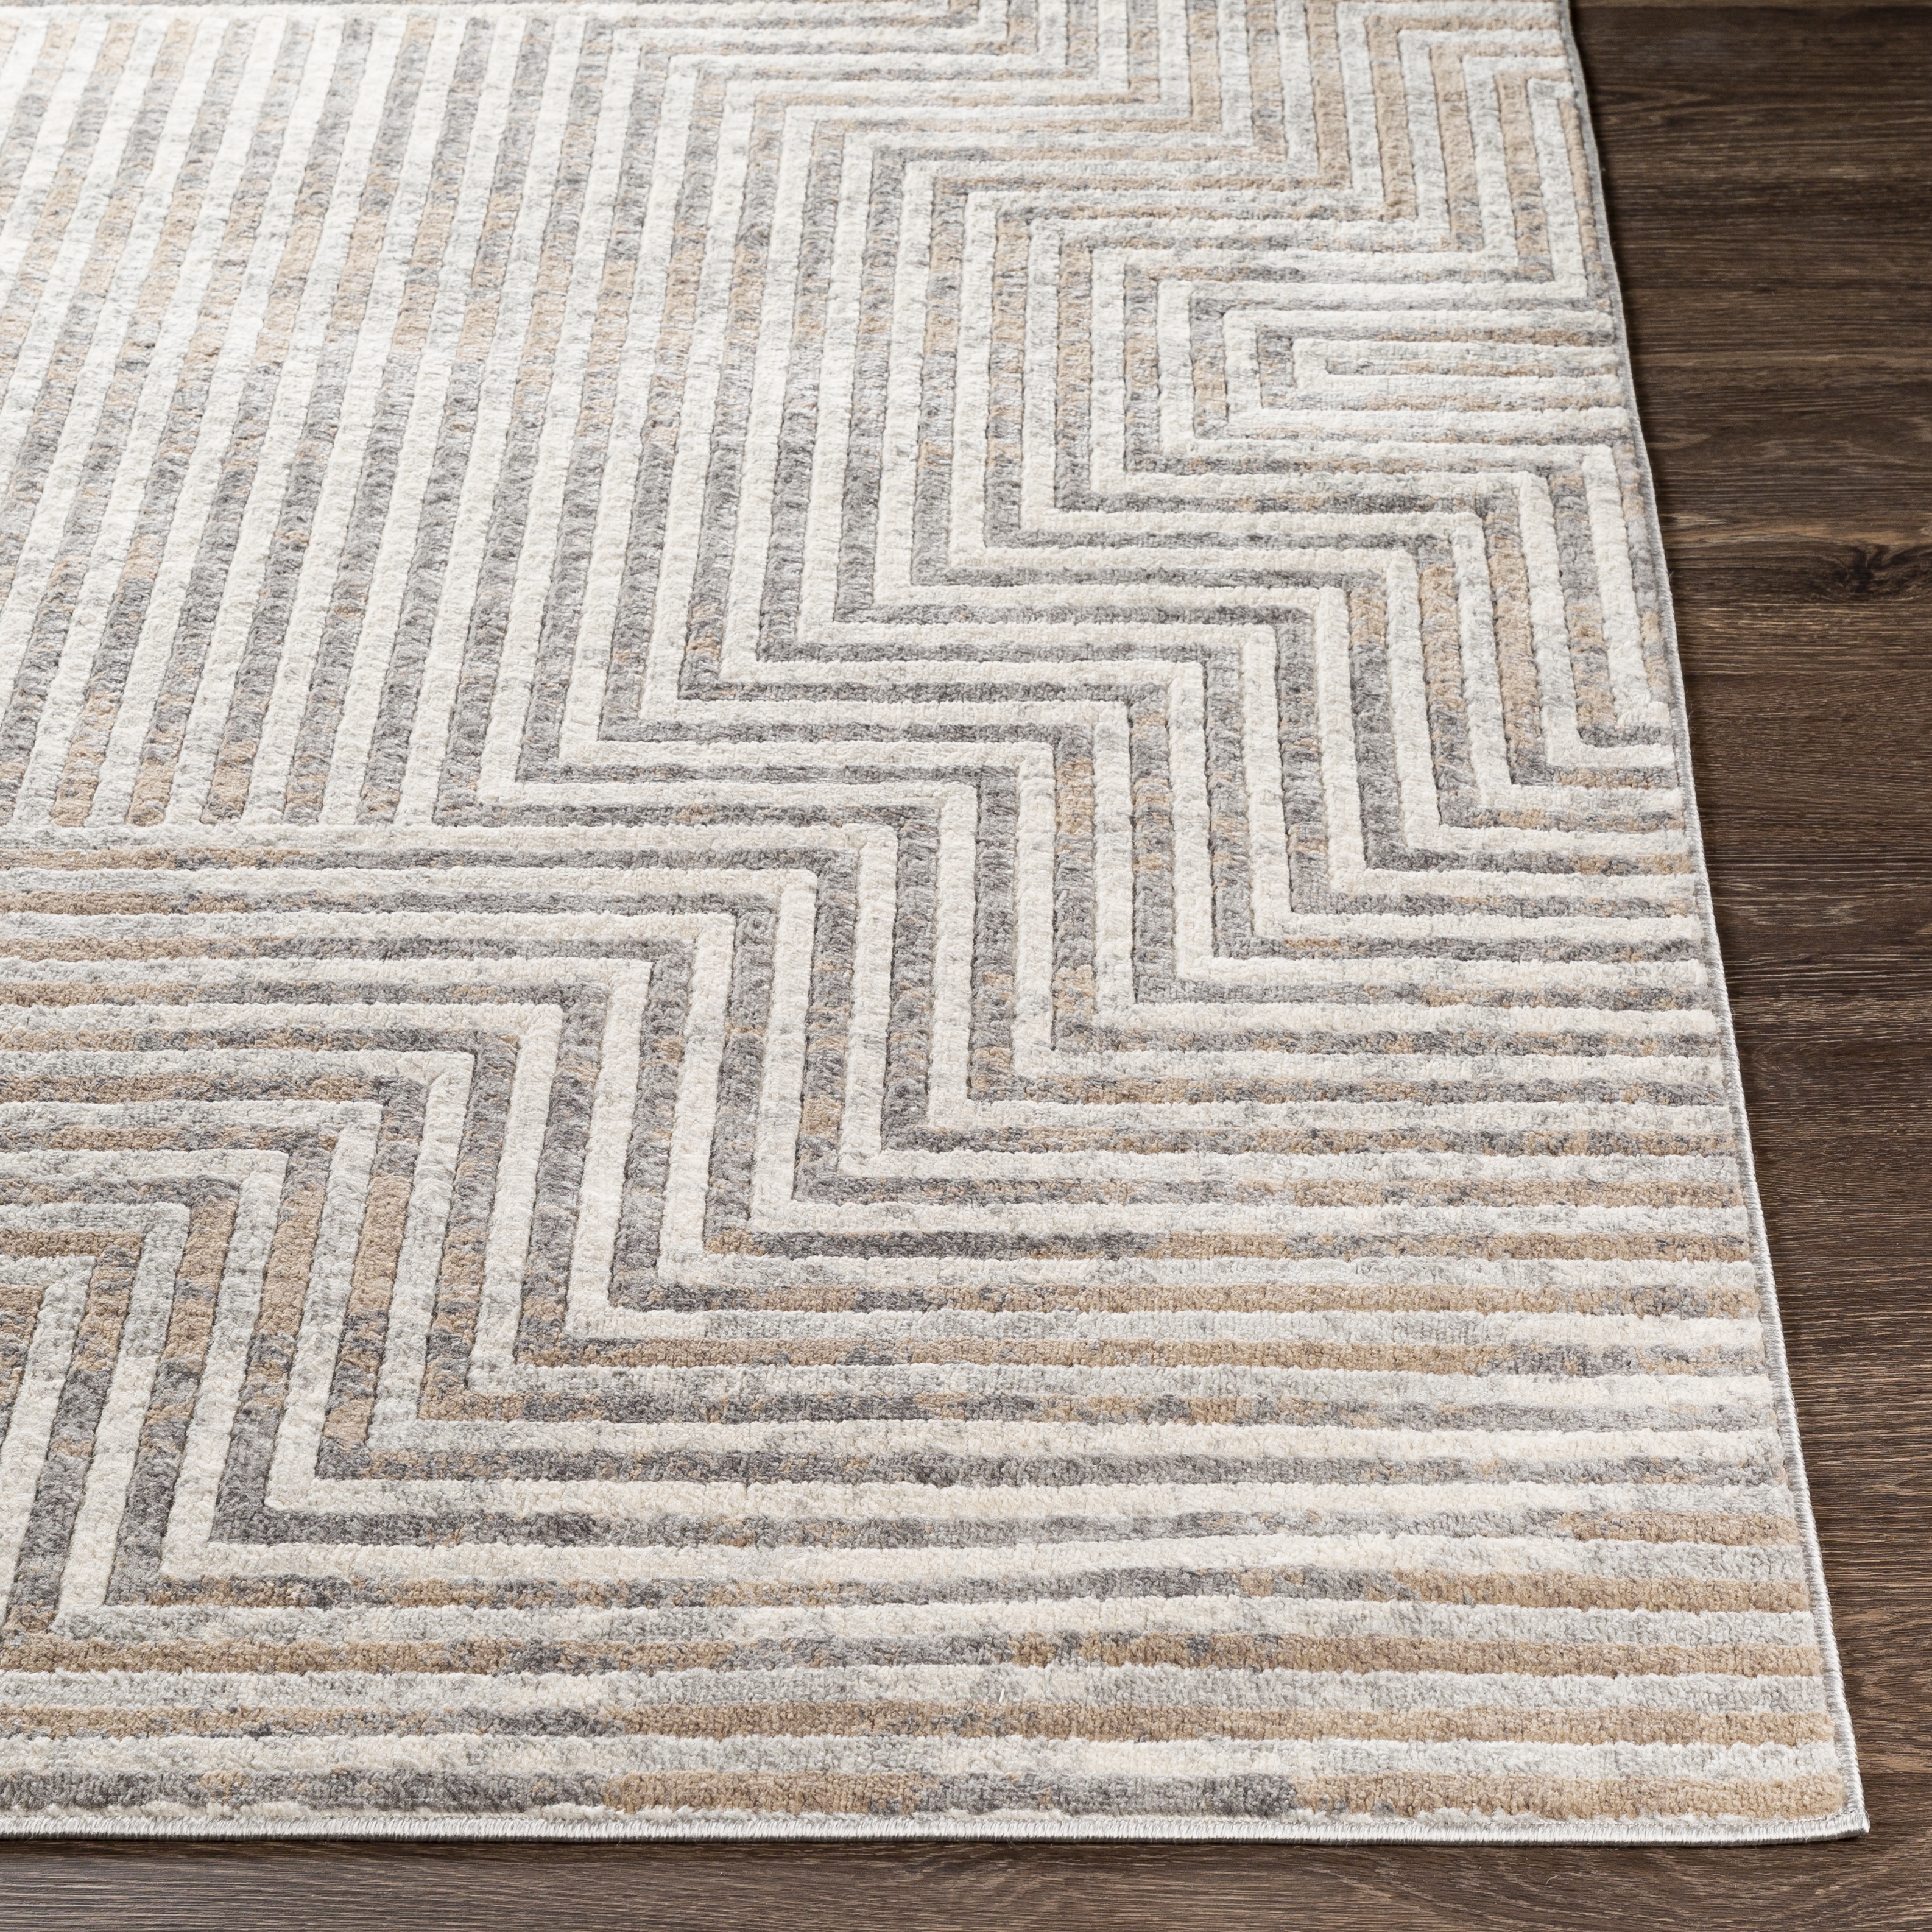 Remy Rug, 7'10" x 10' - Image 2